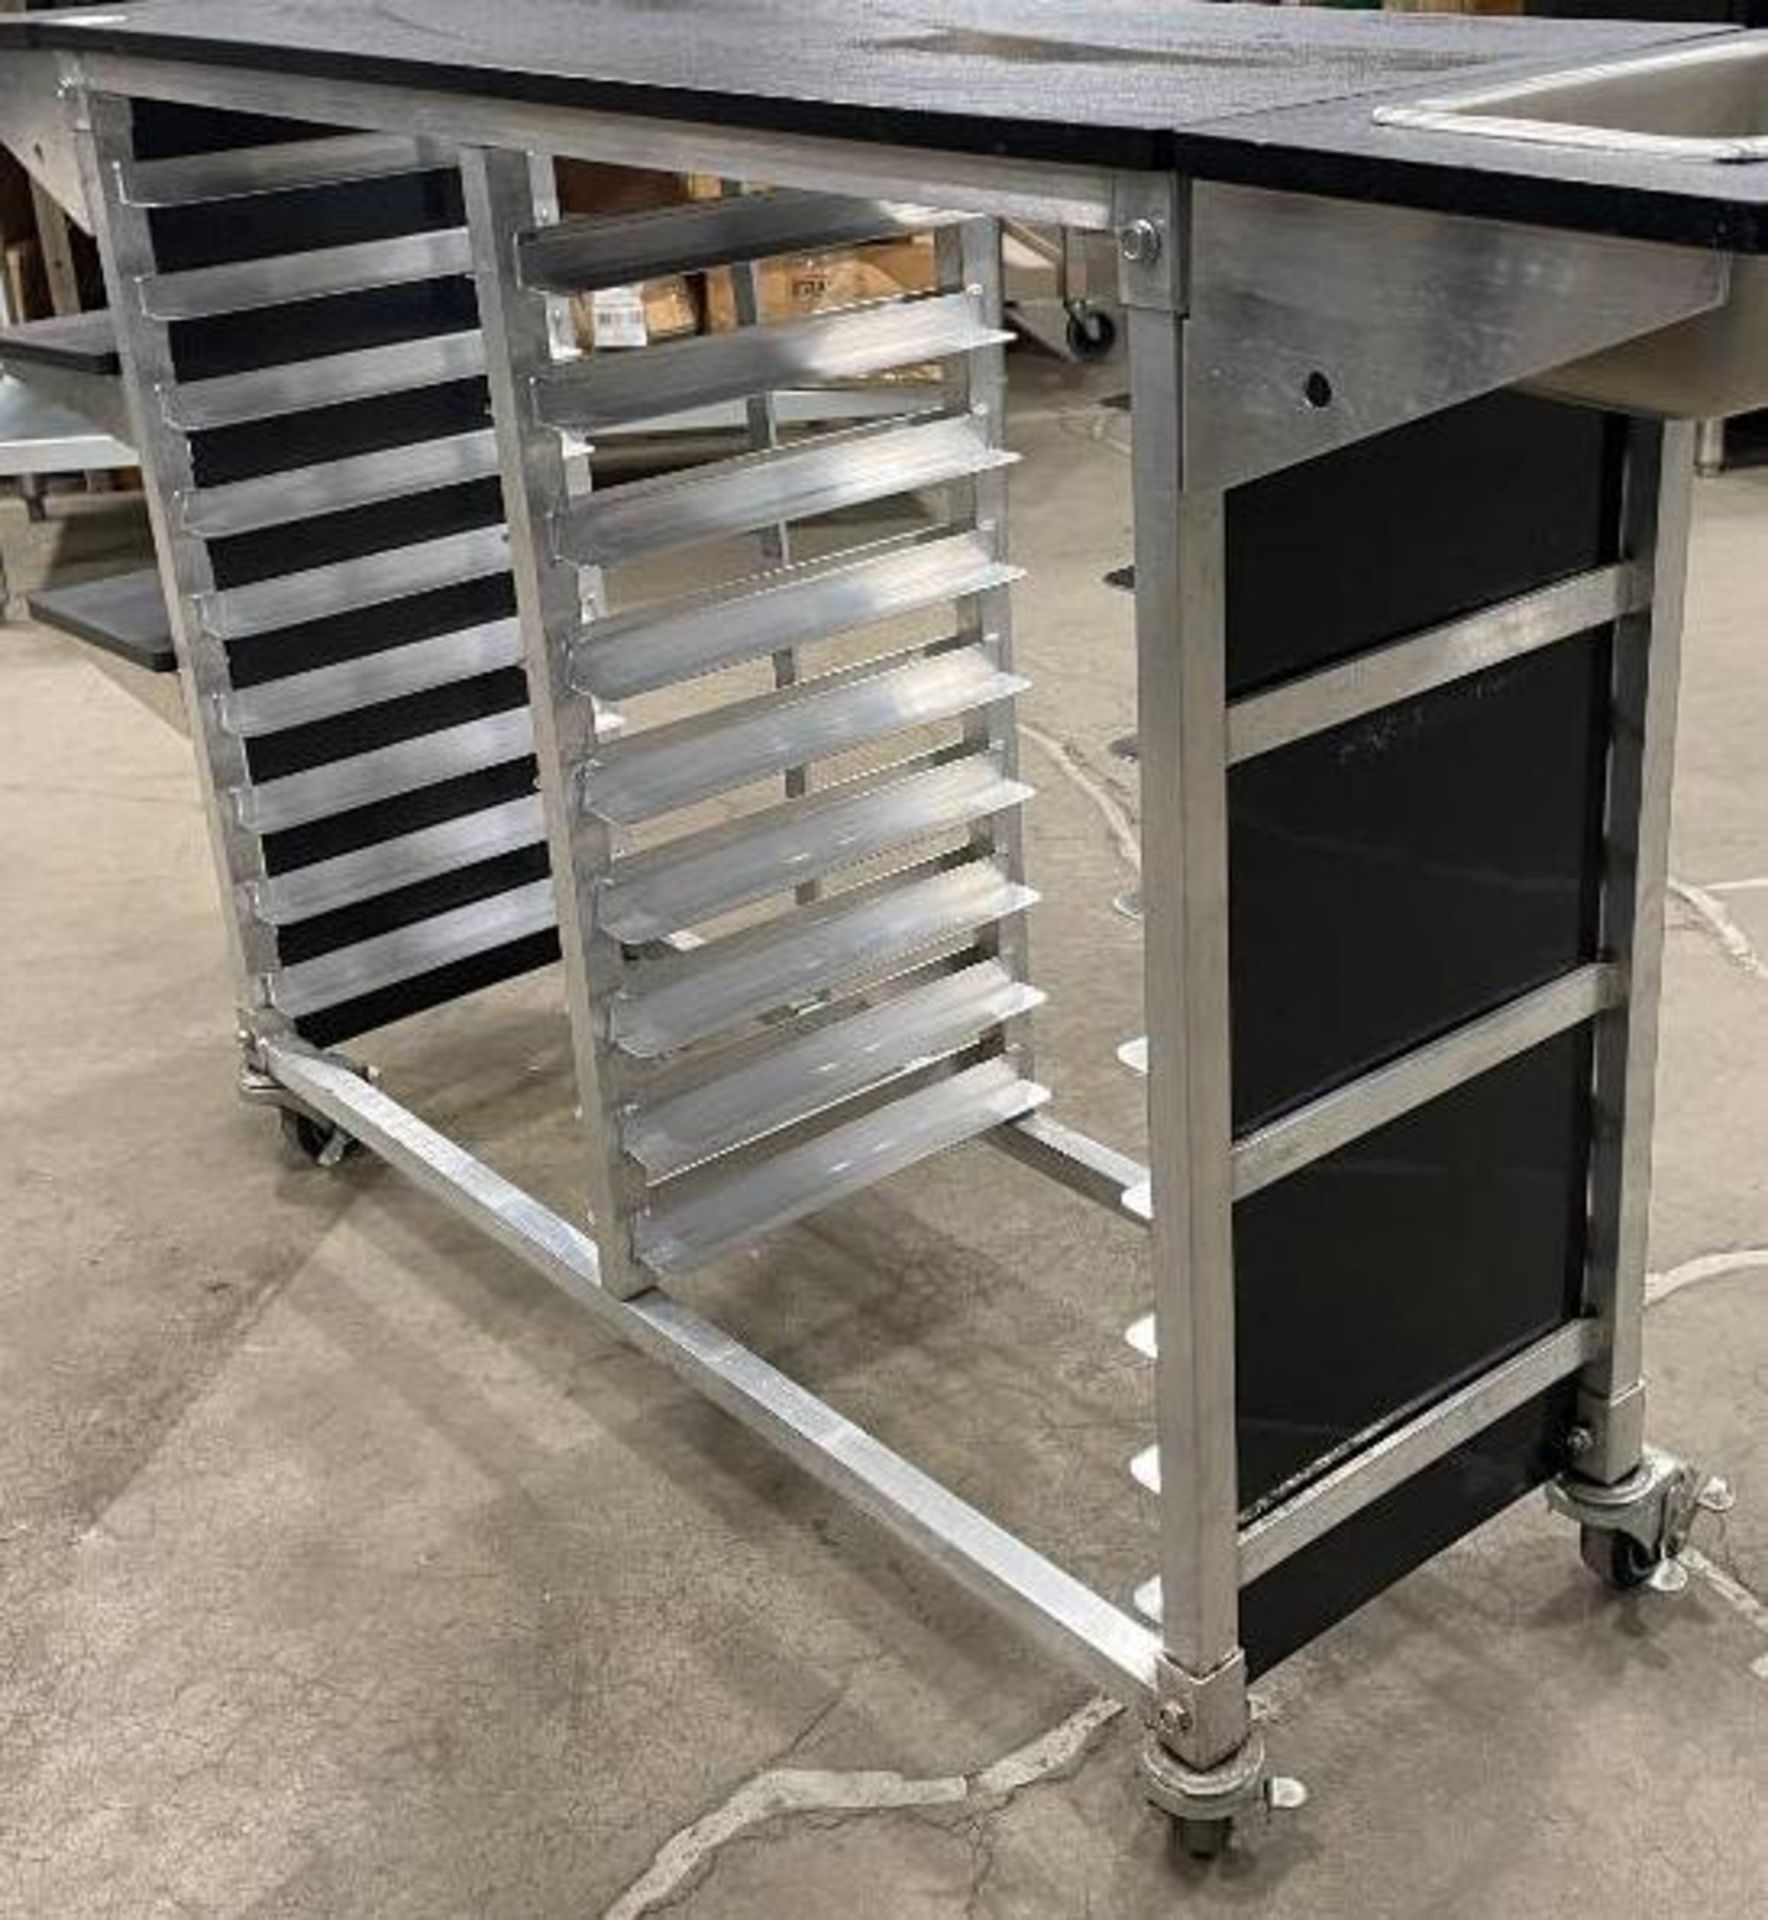 COMMERCIAL FOOD SERVICE CART WITH 18-SLOTS FOR HALF SIZE BUN PANS - Image 6 of 7